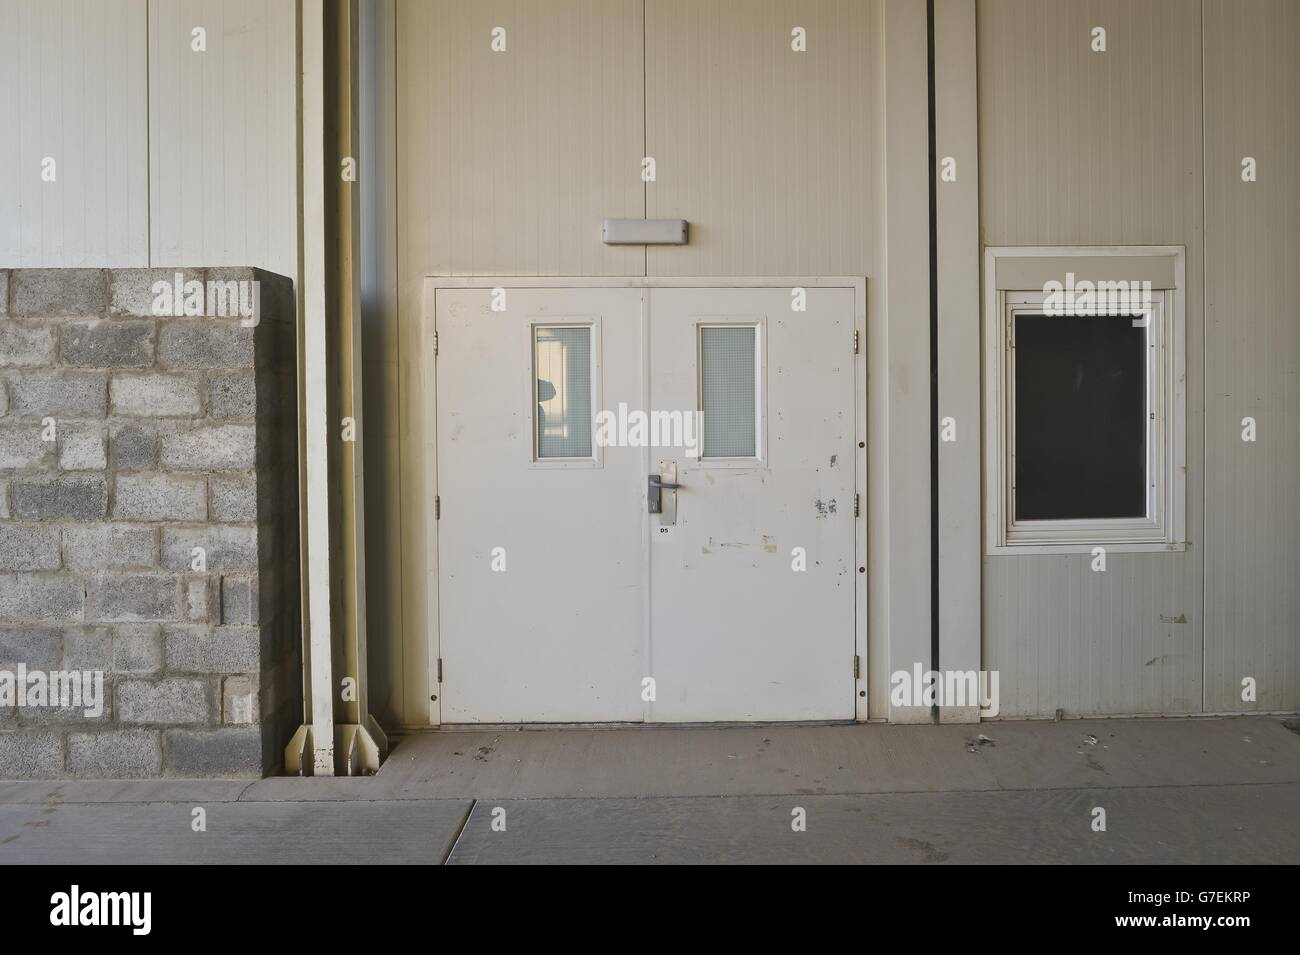 The emergency trauma entrance at the field hospital in Camp Bastion, Afghanistan, is locked shut leaving it looking like a ghost town, where once there were around 40,000 coalition soldiers operating from the base at the height of the conflict. Stock Photo